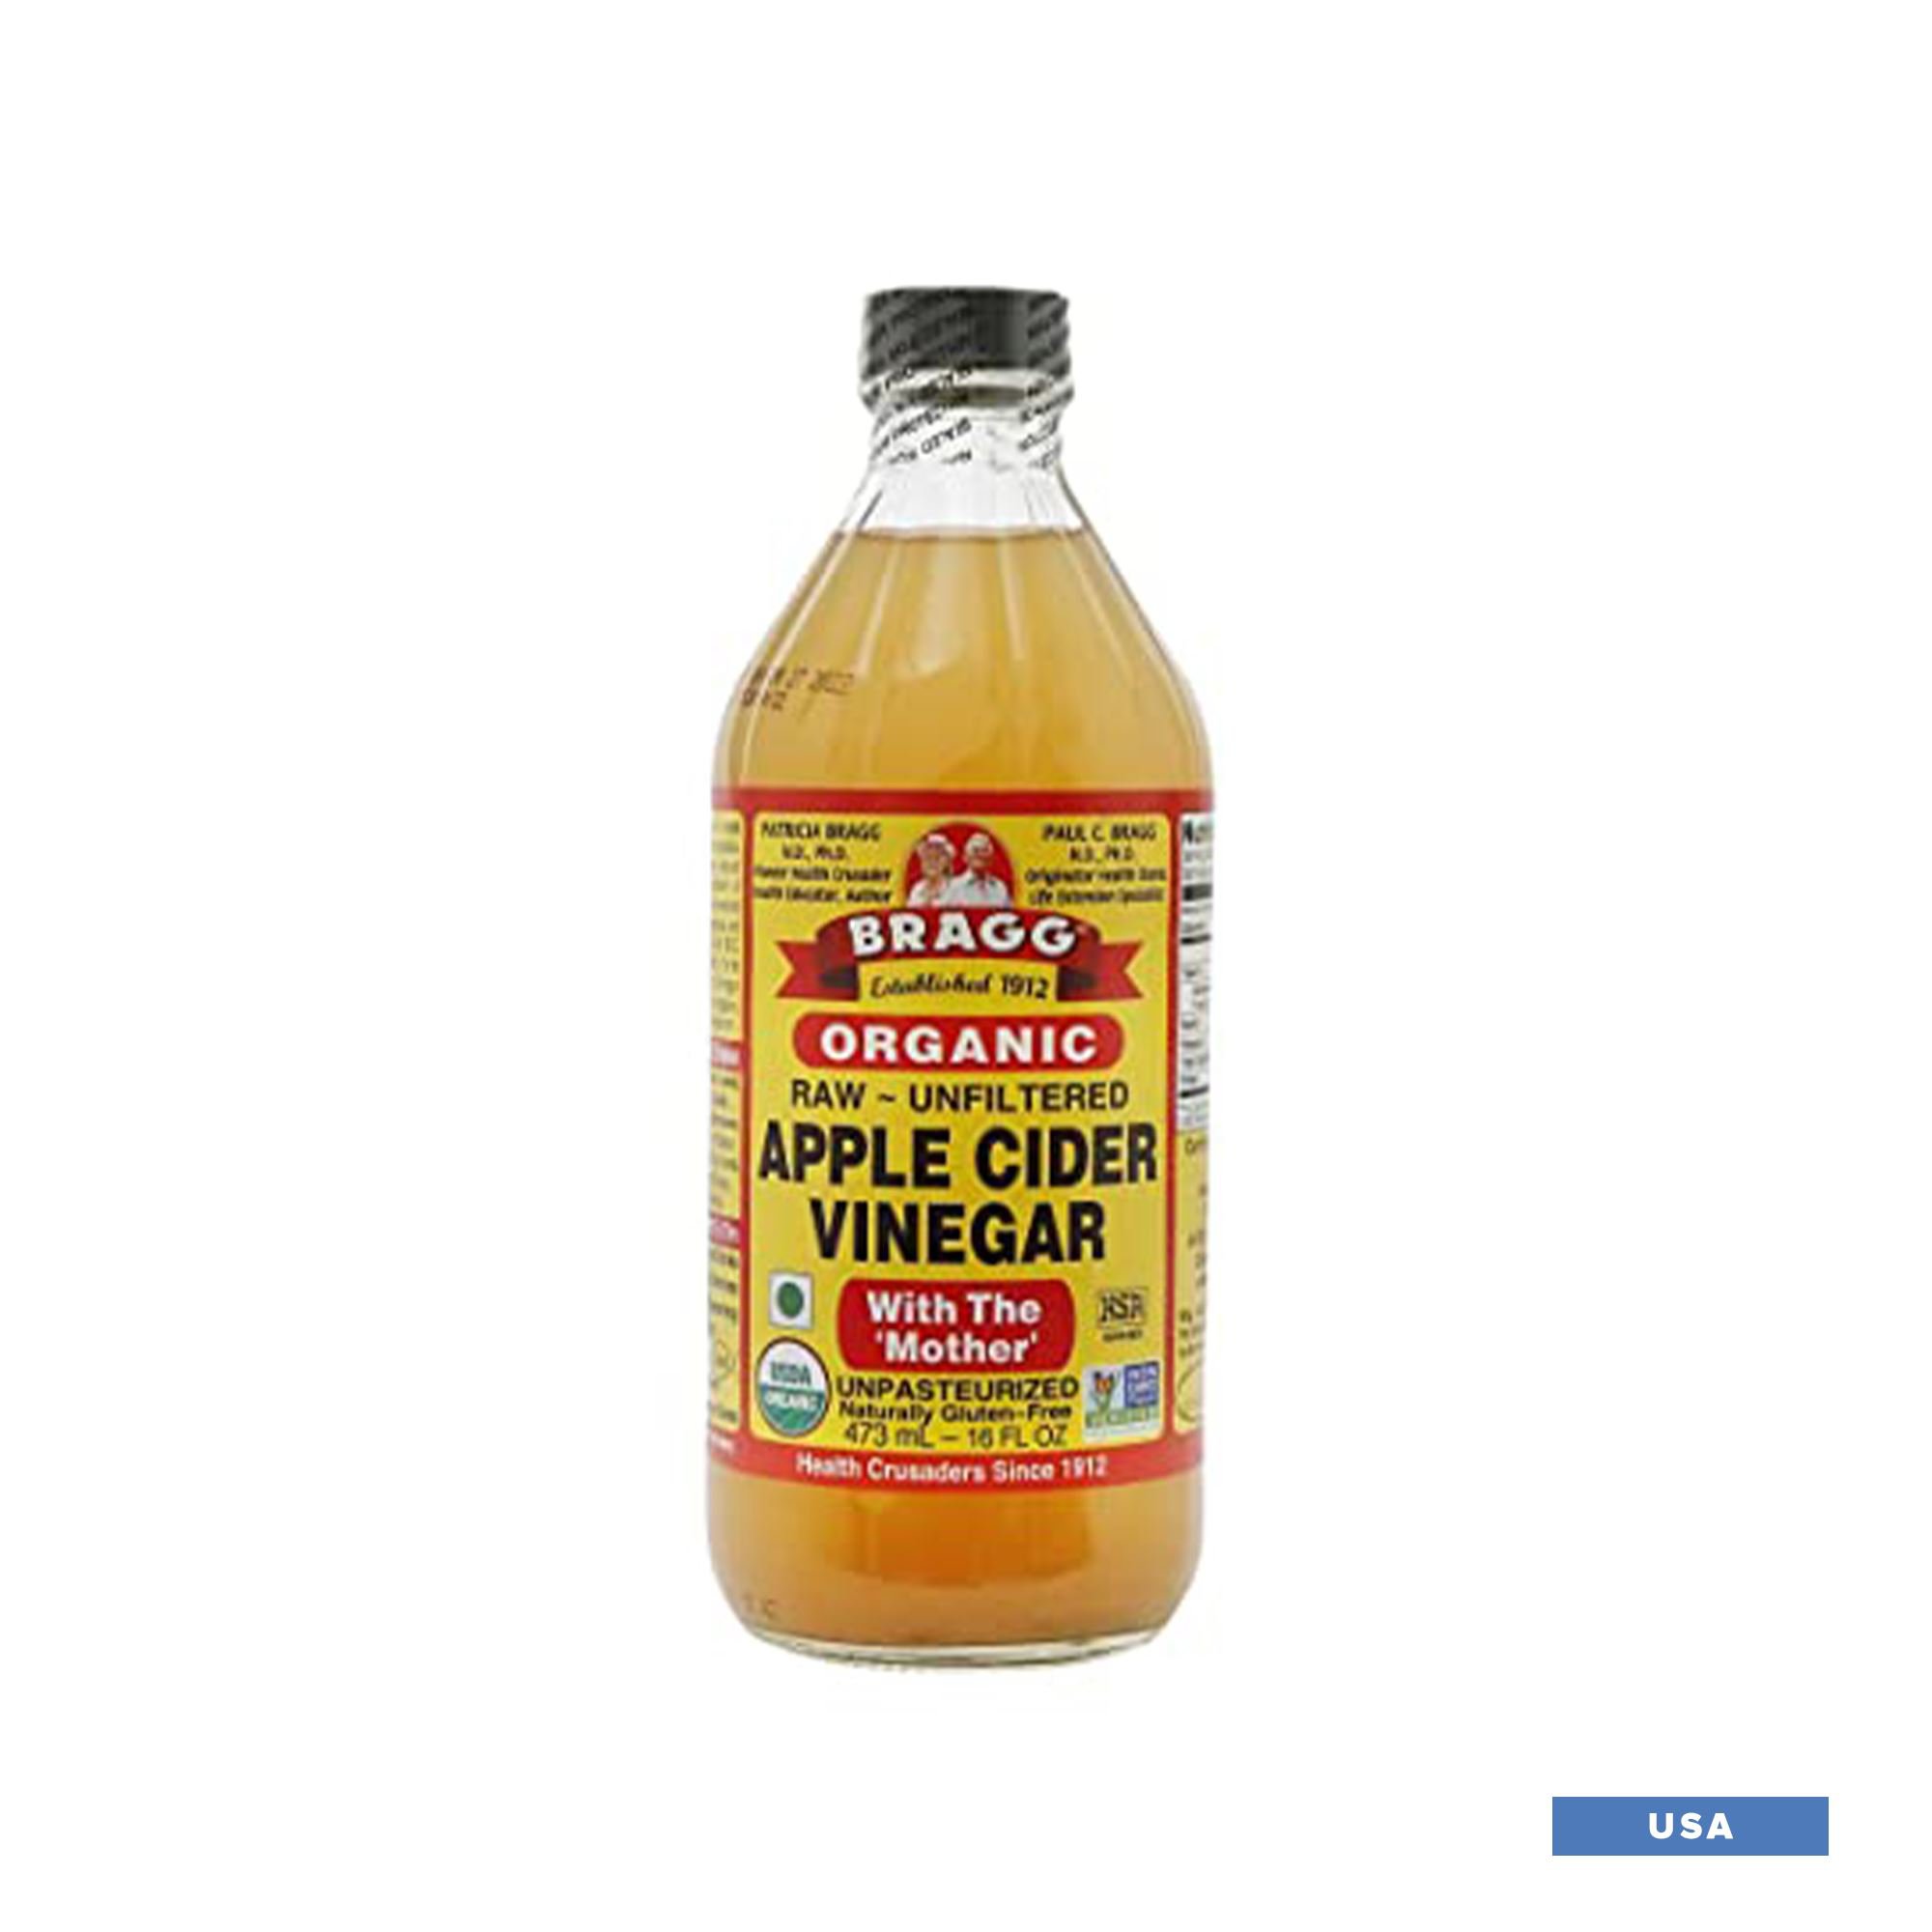 Bragg Organic Apple Cider Vinegar with the mother | MARKETPLACE